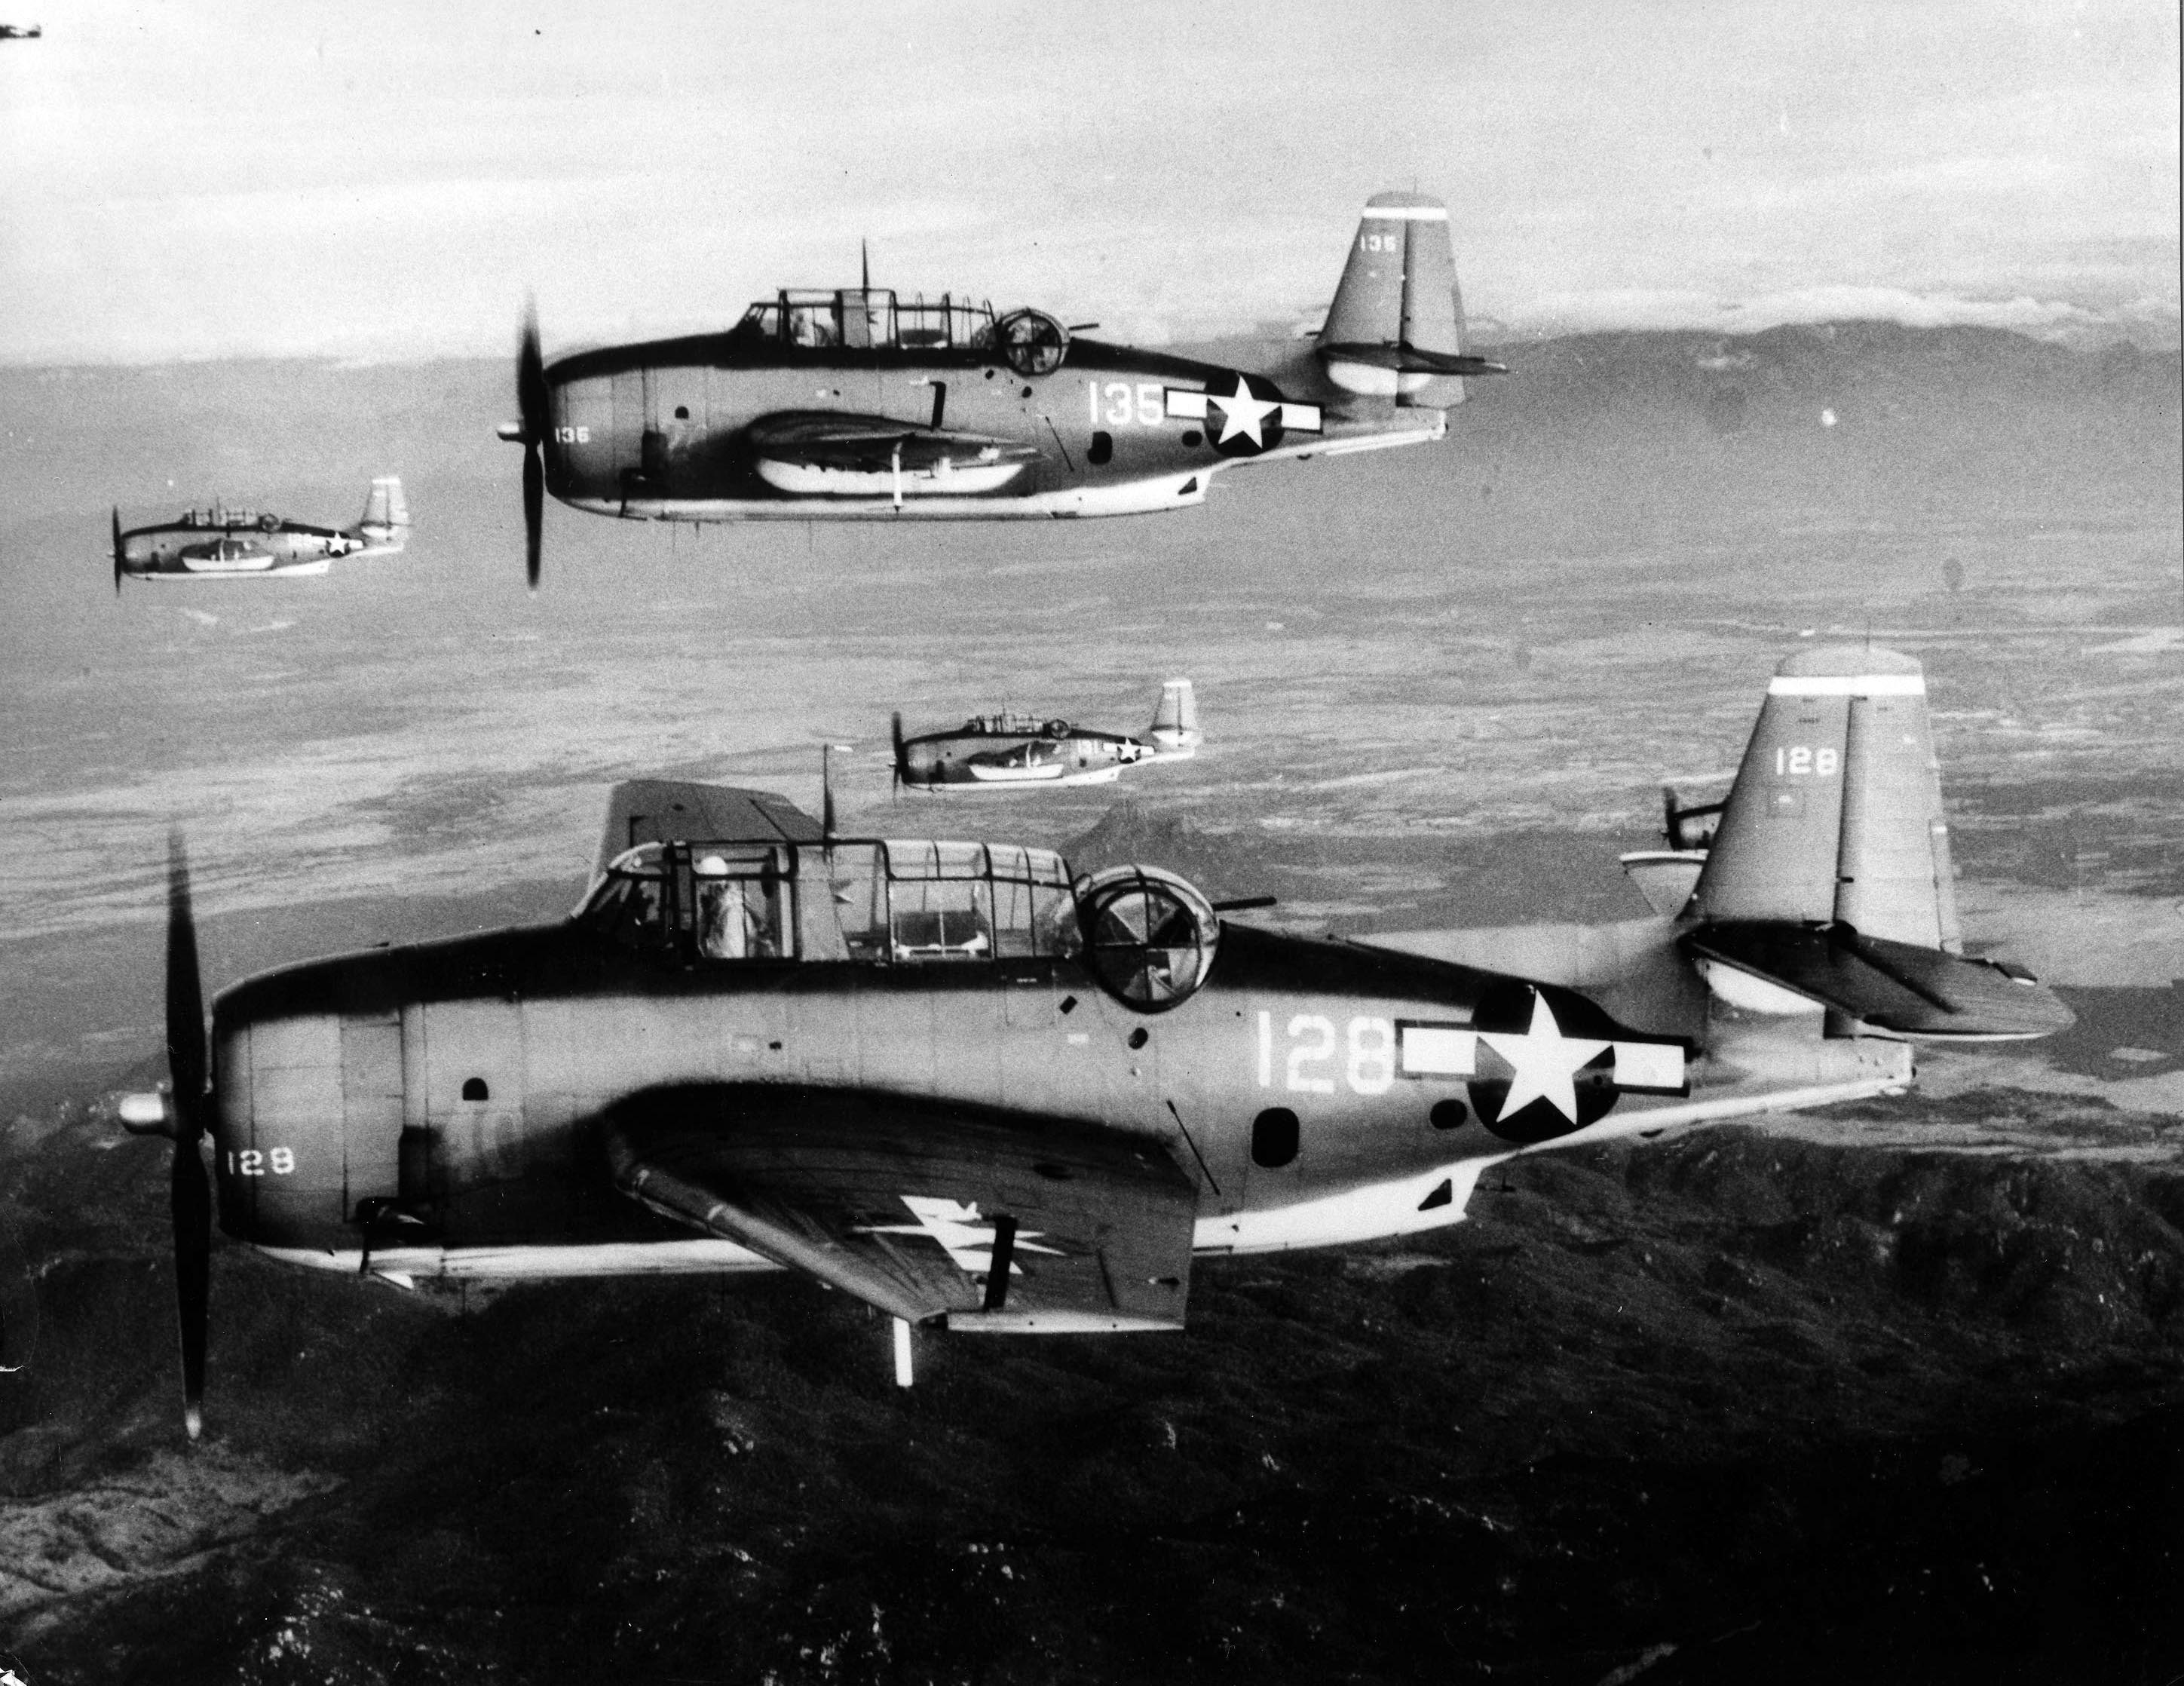 Four TBM Avengers of Torpedo Squadron 4 flying from the USS Essex on their way to strike targets along the coast of French Indochina (now Vietnam), 12 Jan 1945.